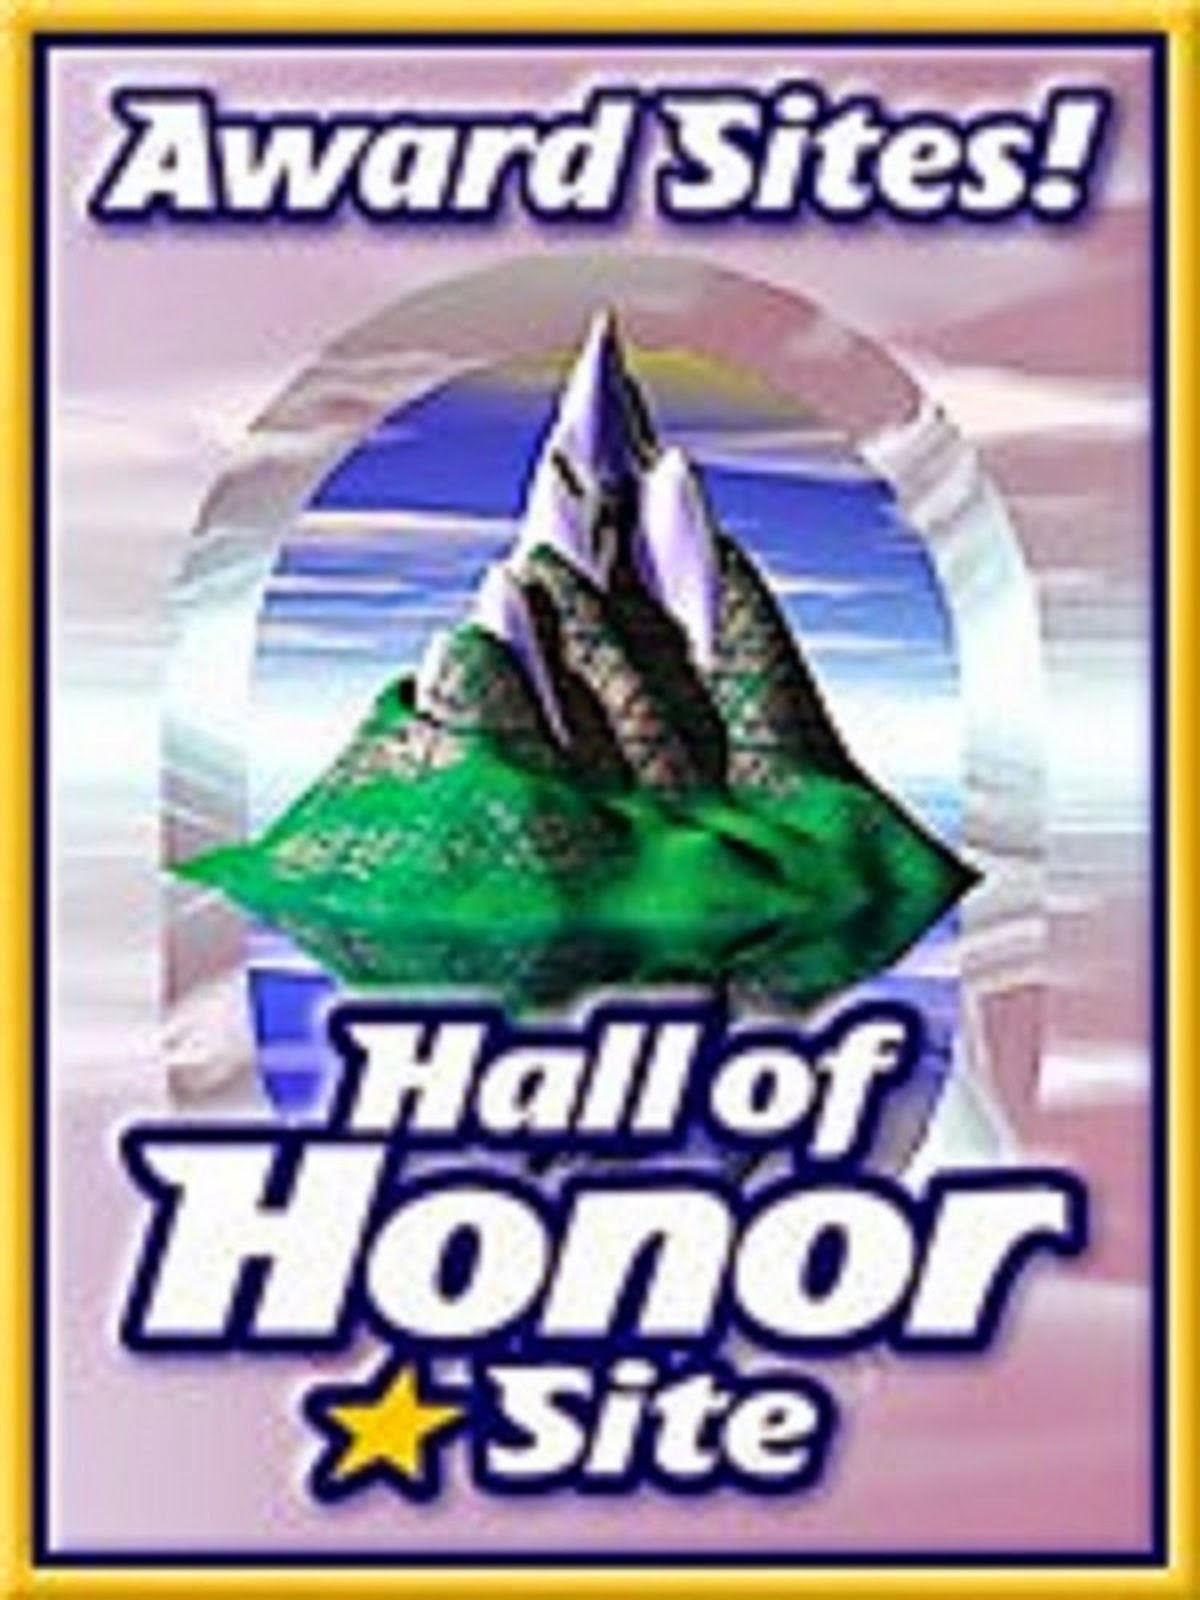 HALL OF HONOR AWARD SITES!